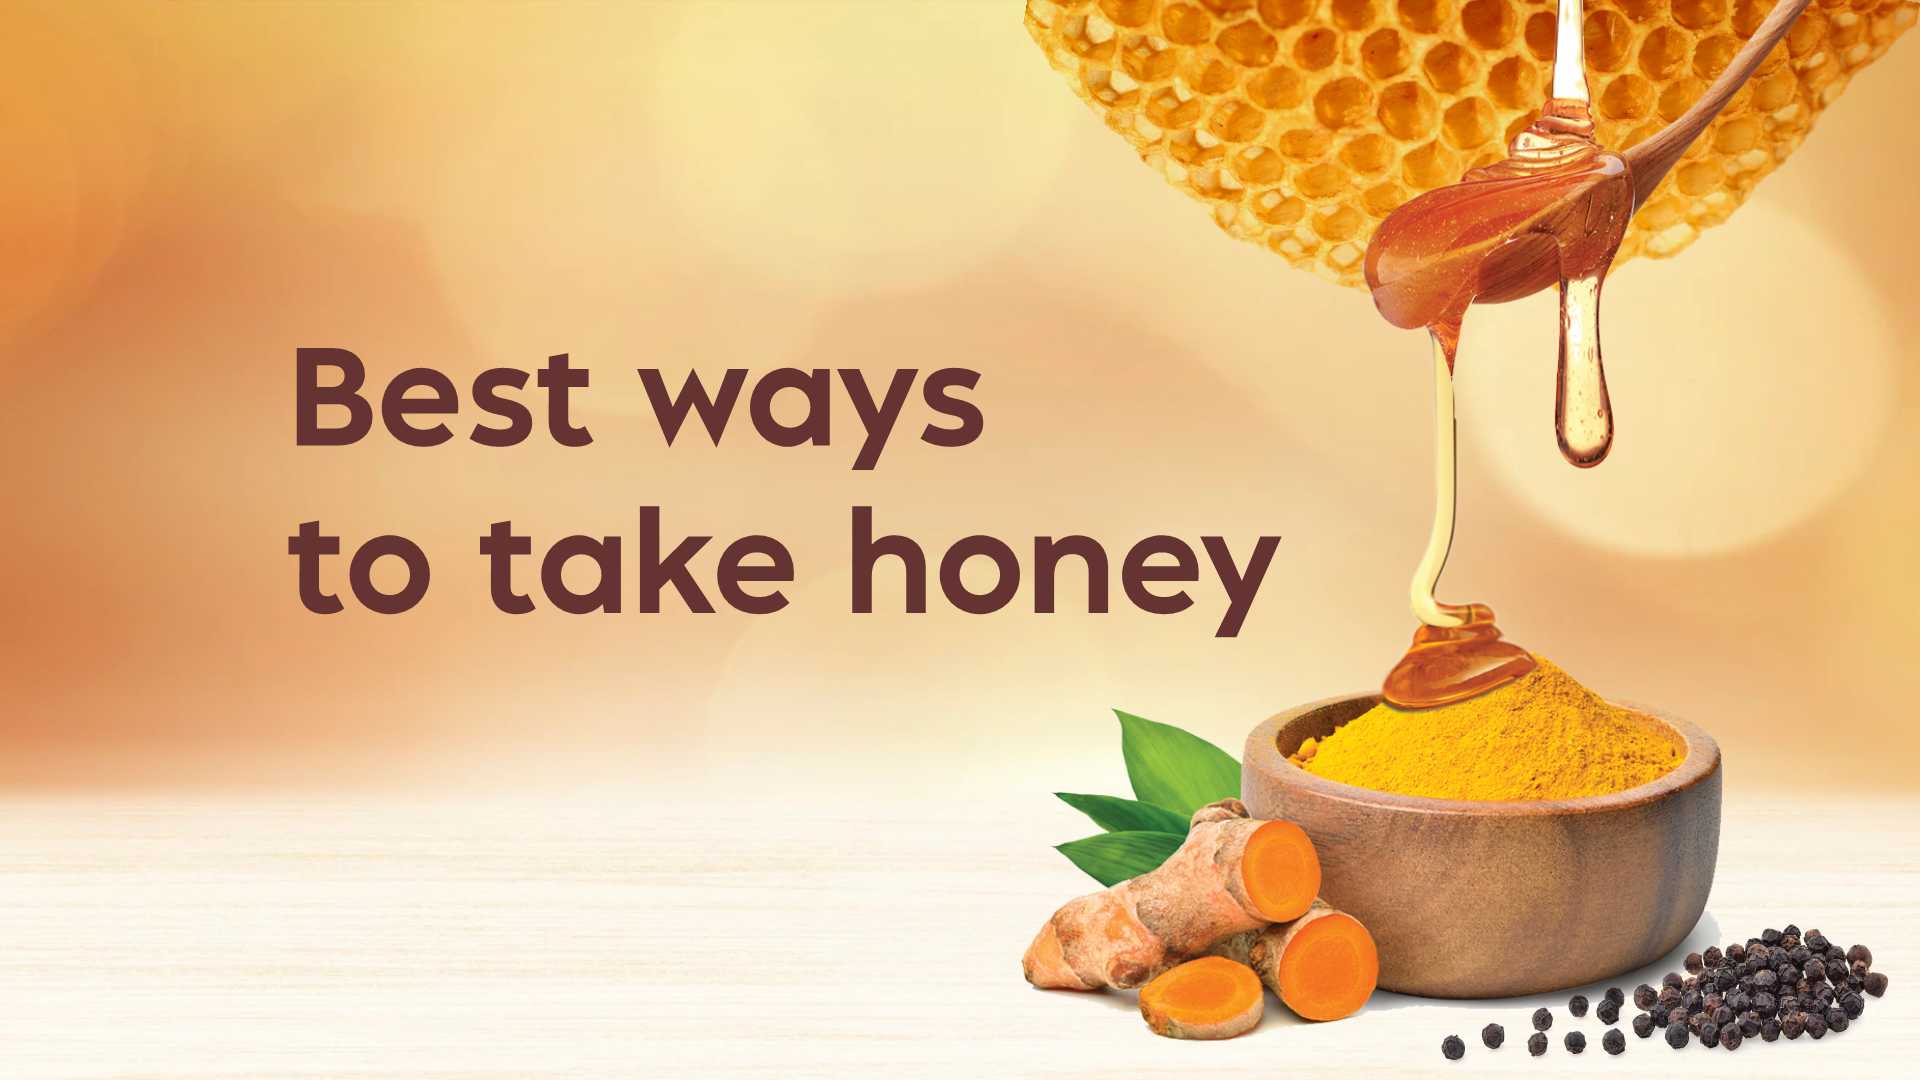 Include these best ways to take honey